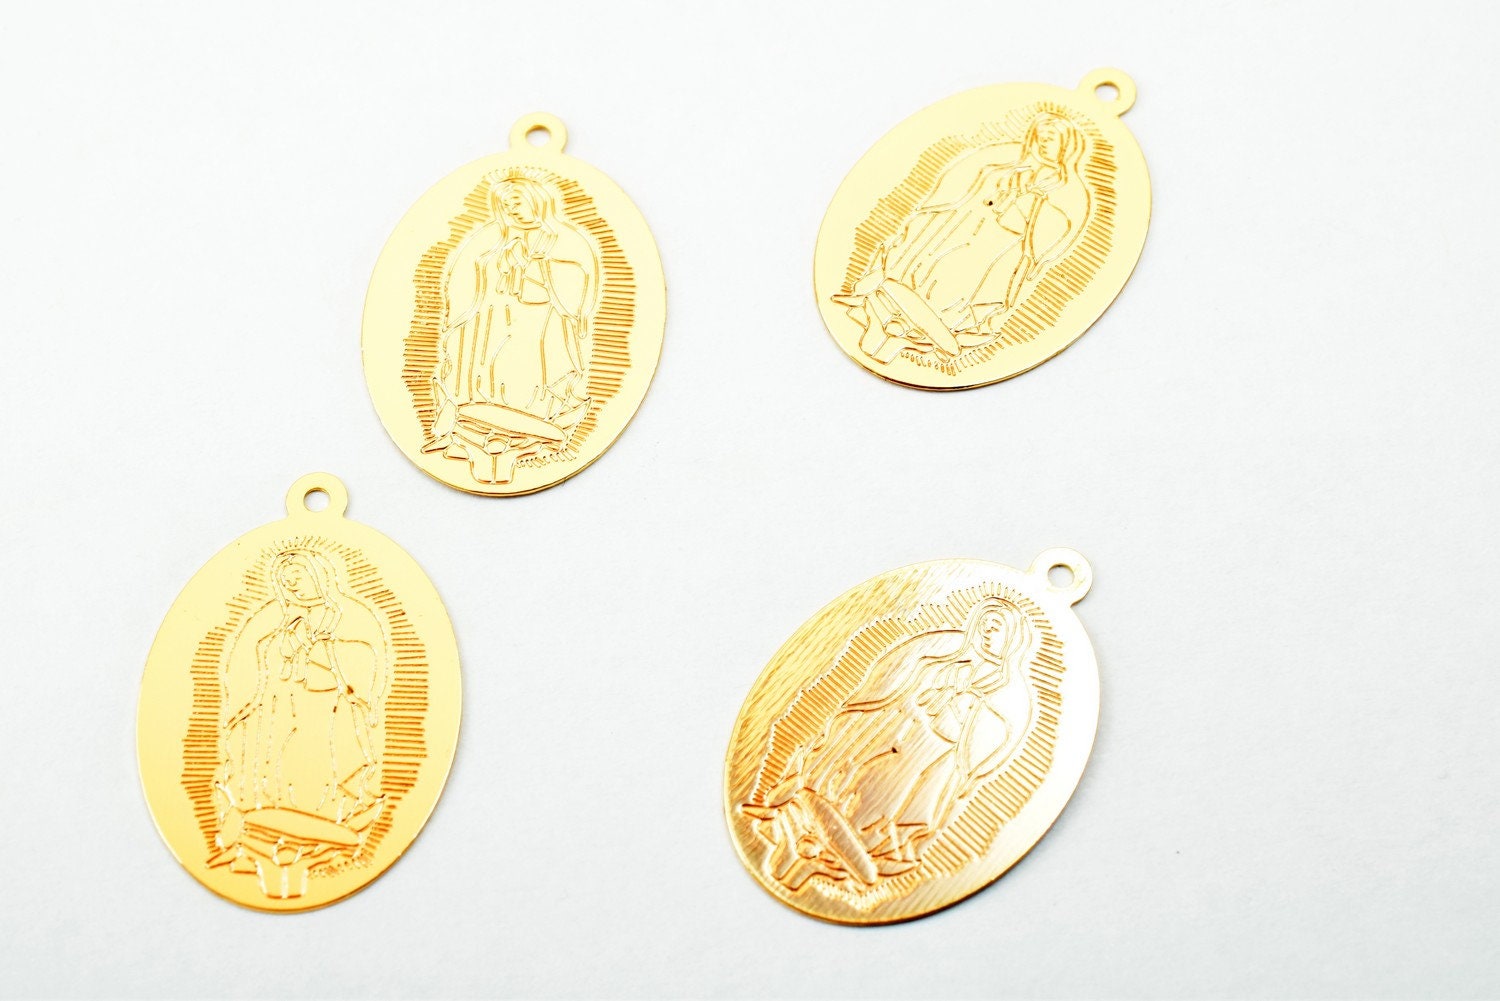 4 PCs Dainty Thin 18K Rose as Gold Filled tarnish resistant Saint Mary Charm Pendant Size 22x15mm Thickness 0.25mm For Jewelry Making DGF10